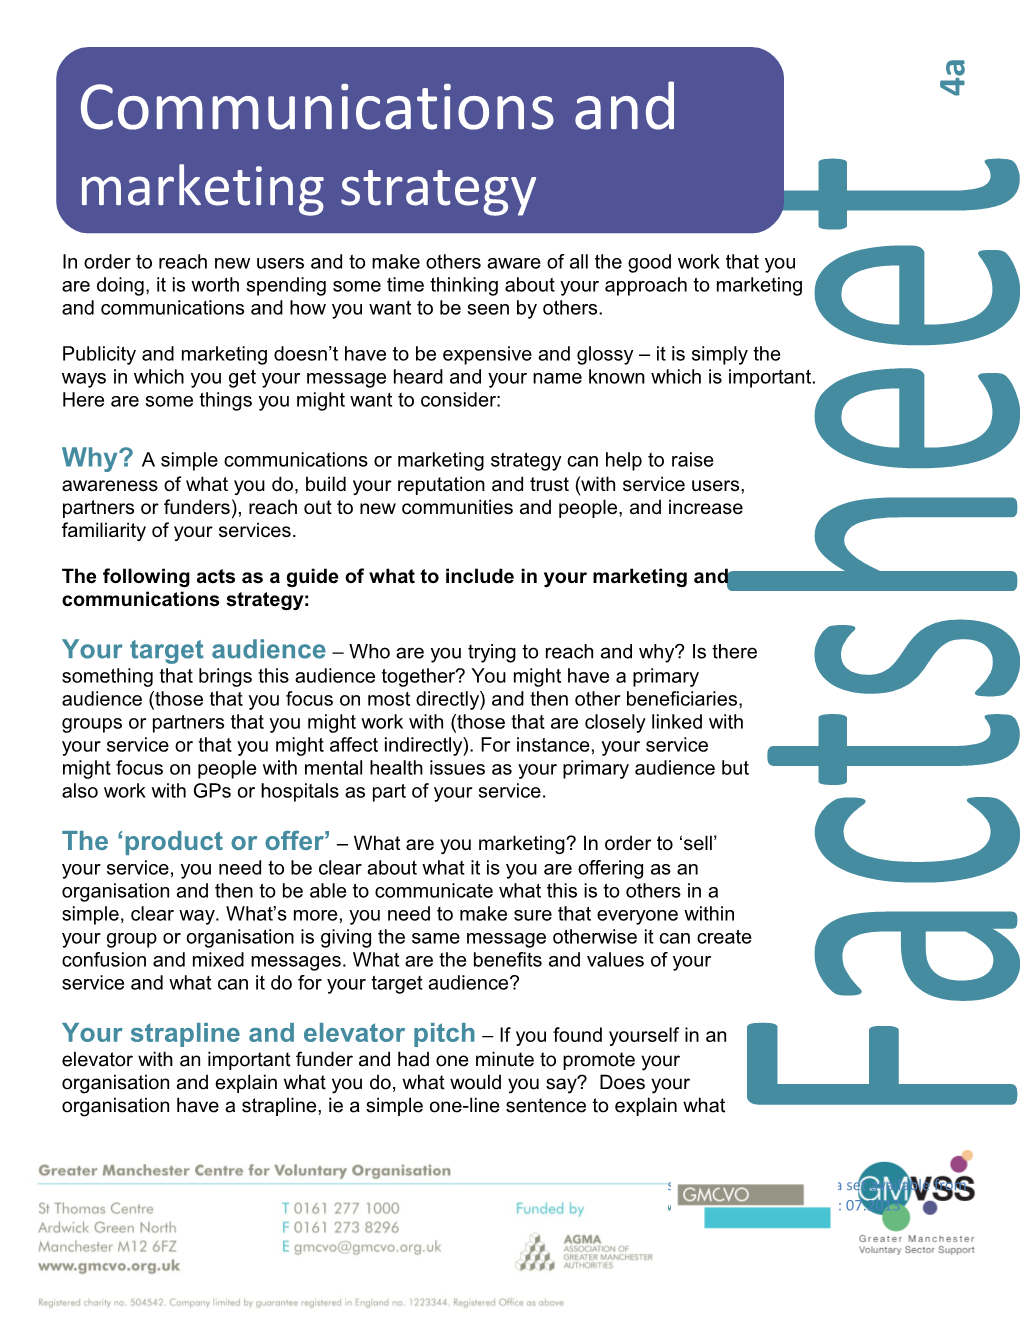 The Following Acts As a Guide of What to Include in Your Marketing and Communications